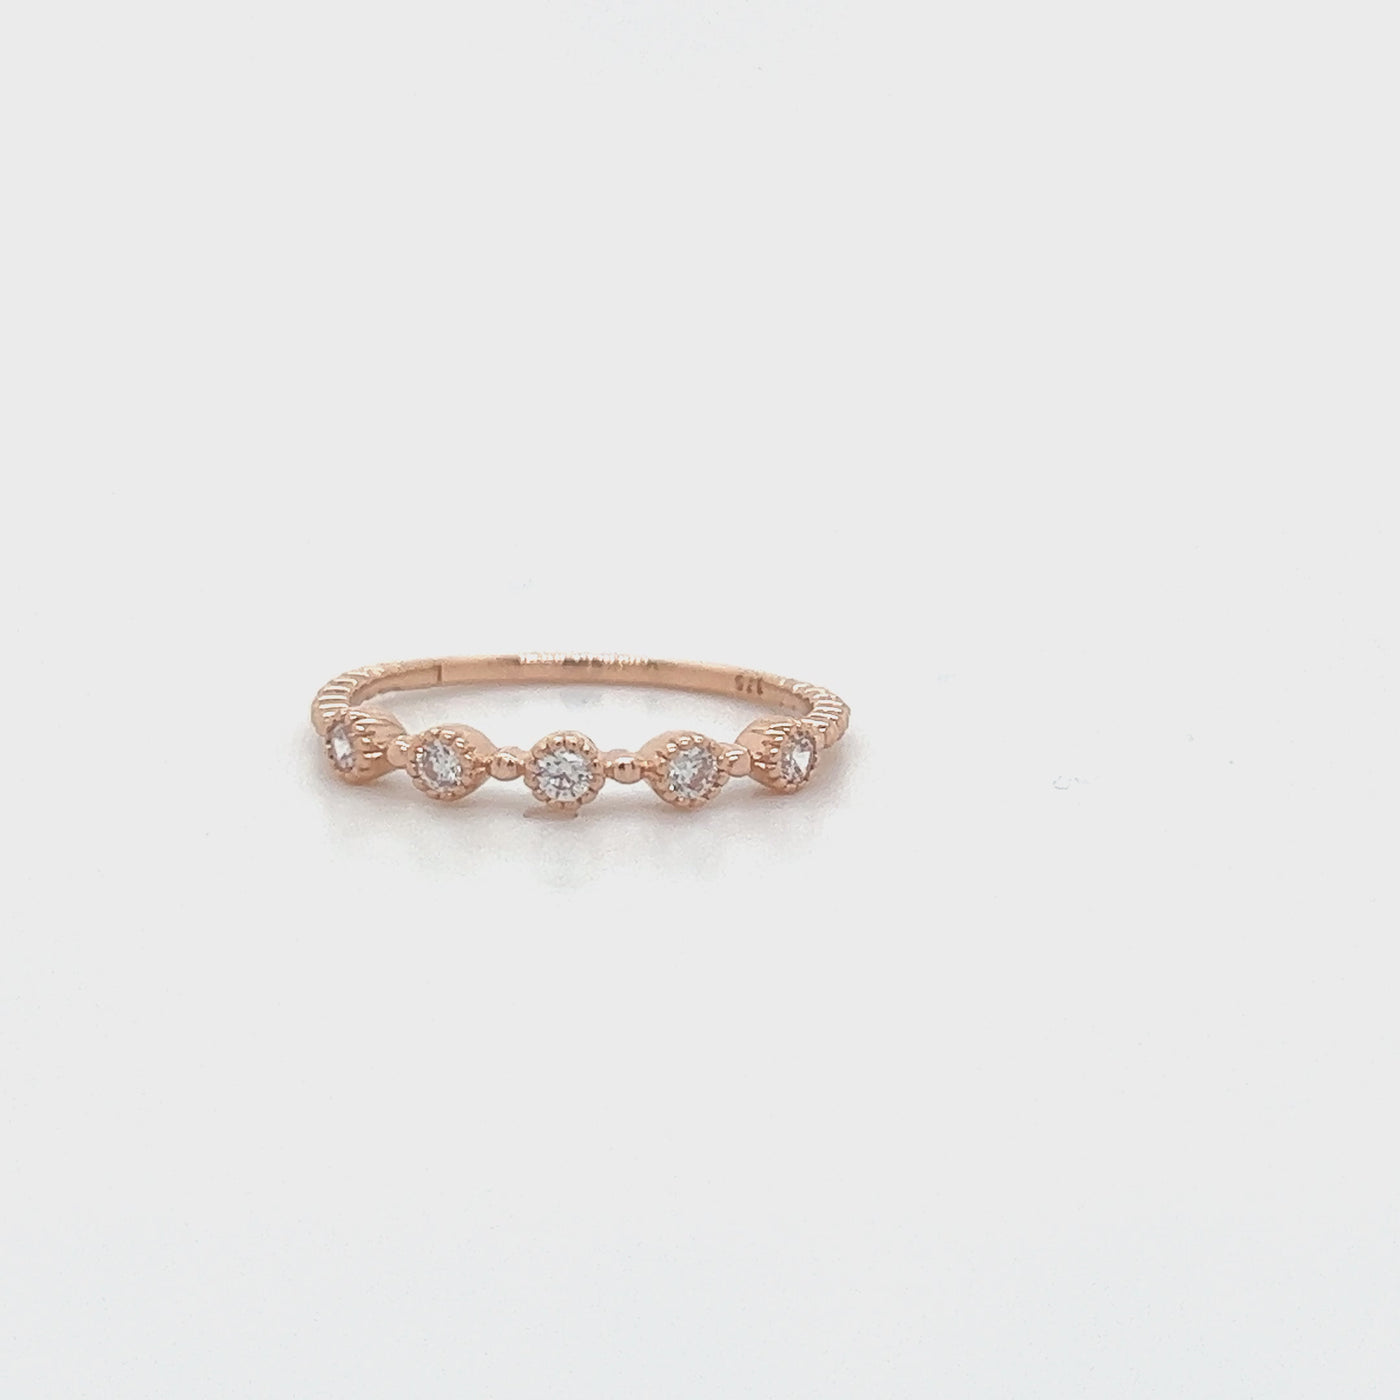 9ct Rose Gold Band set with Cubic zirconias.